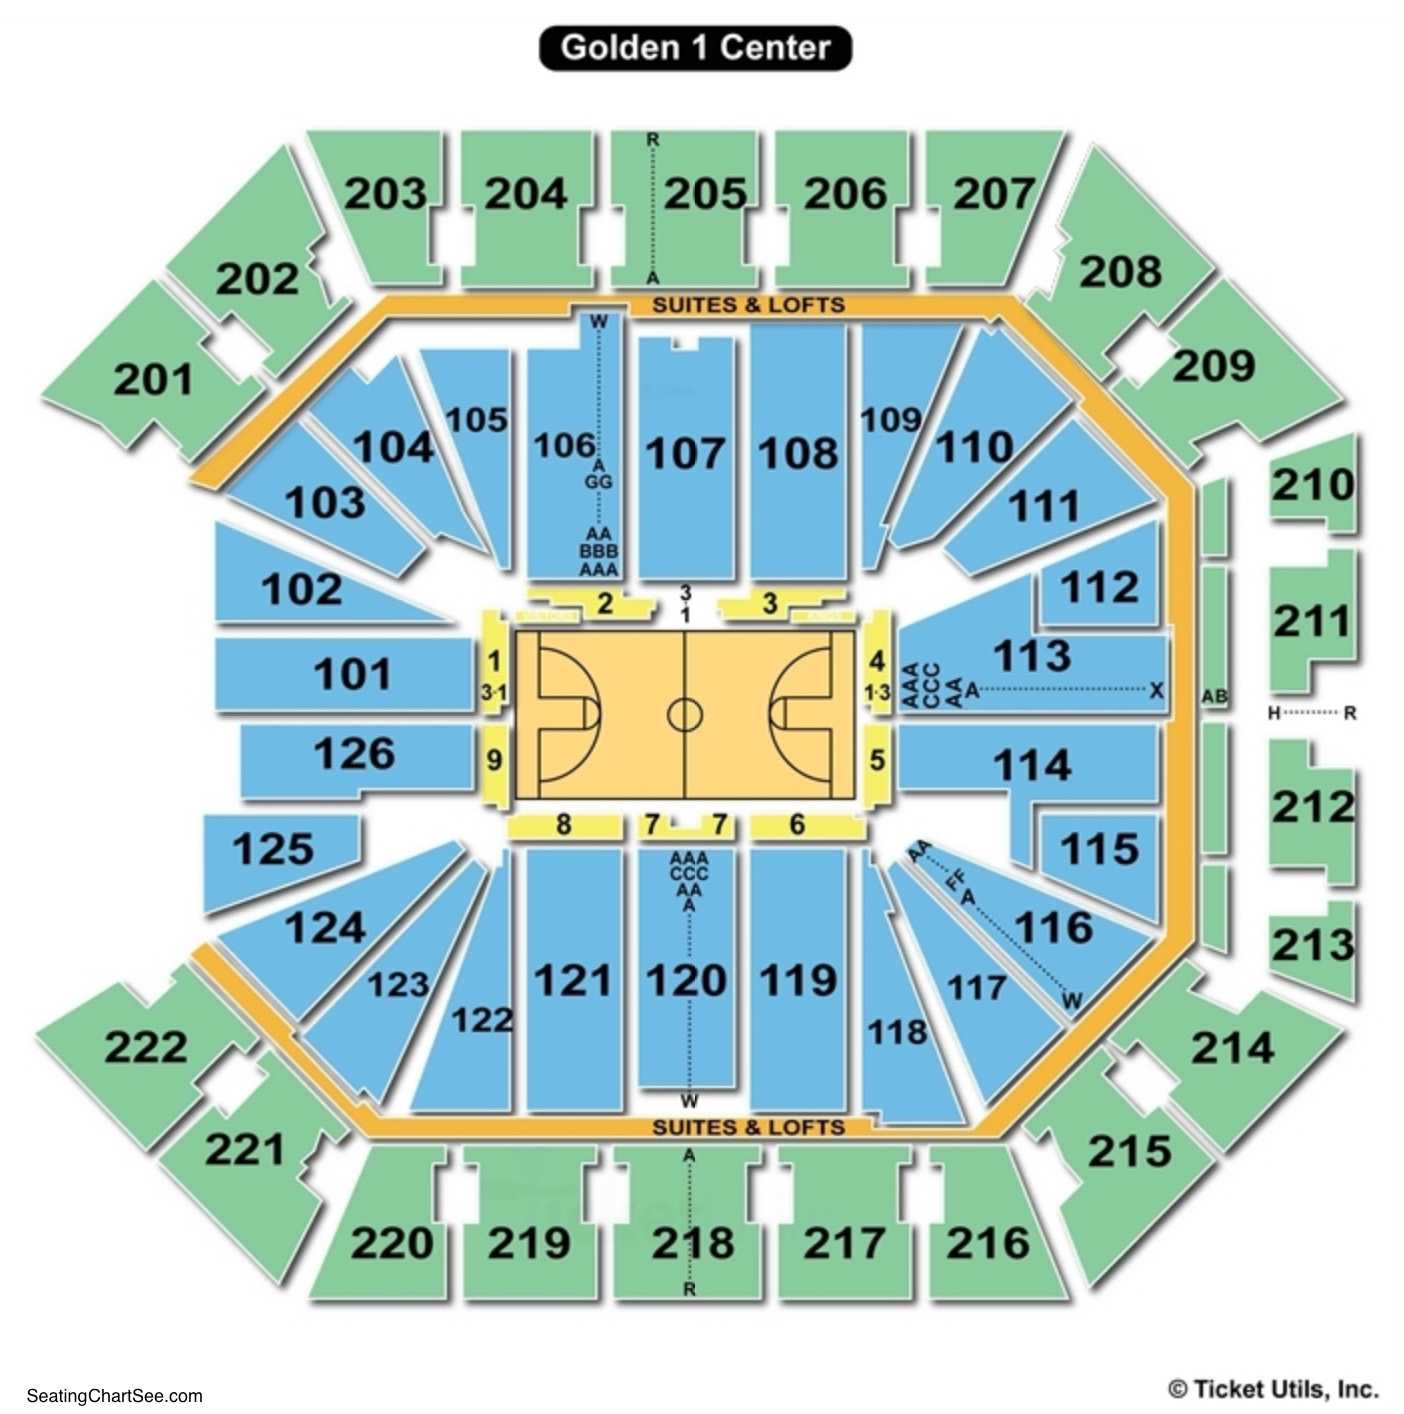 Golden 1 Center Seating Charts Views Games Answers Cheats